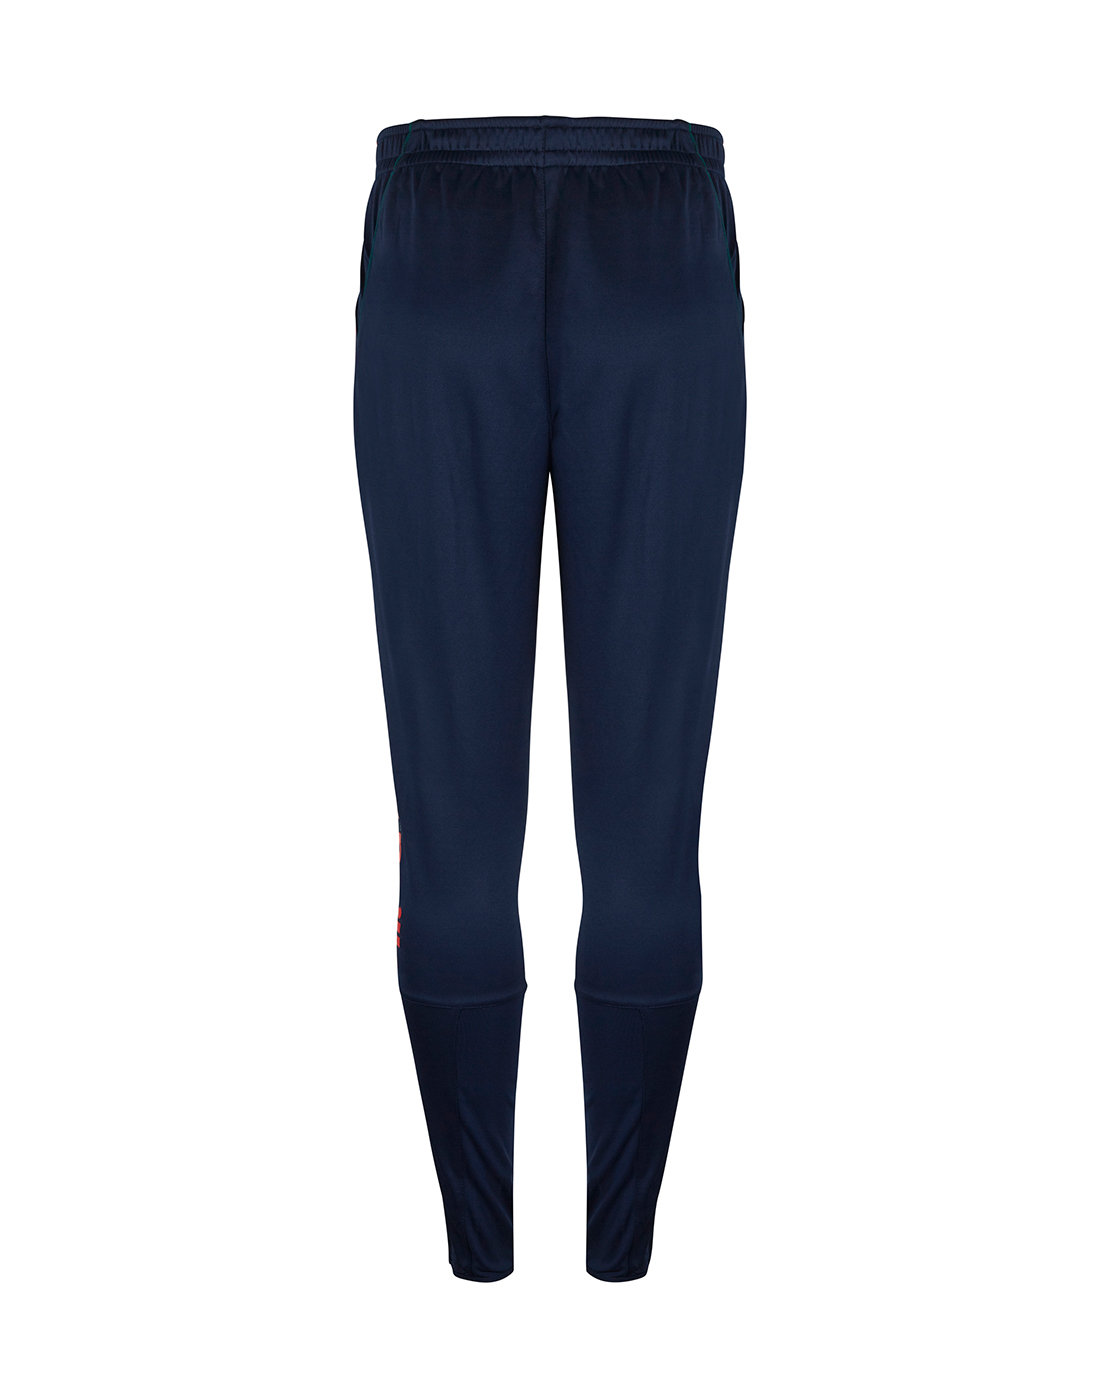 O'Neills Adult Mayo Solar Pants - Navy | Life Style Sports IE